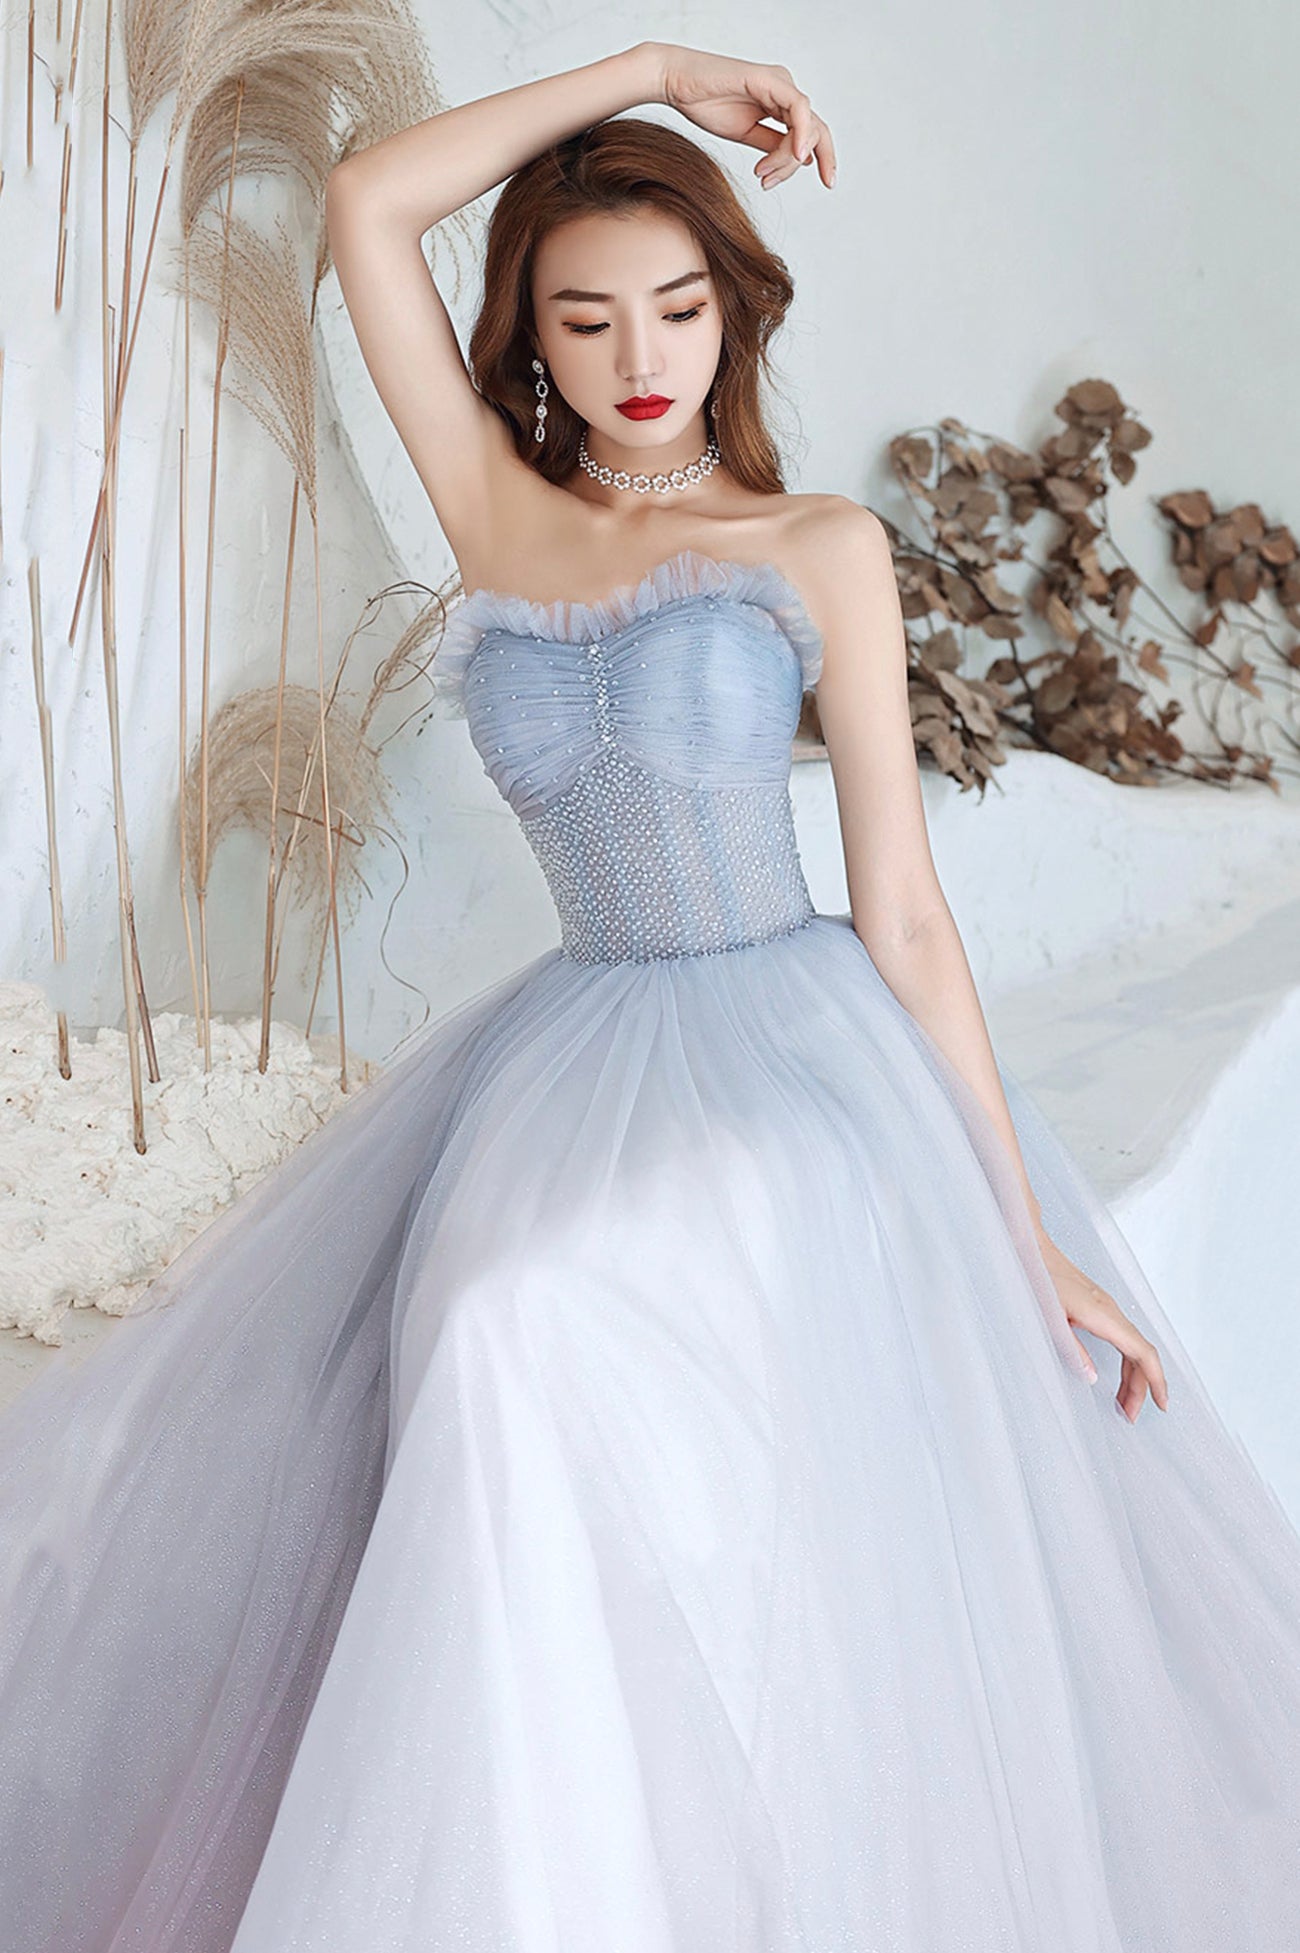 Blue Tulle Long A-Line Prom Dress with Beaded, Blue Strapless Evening Dress